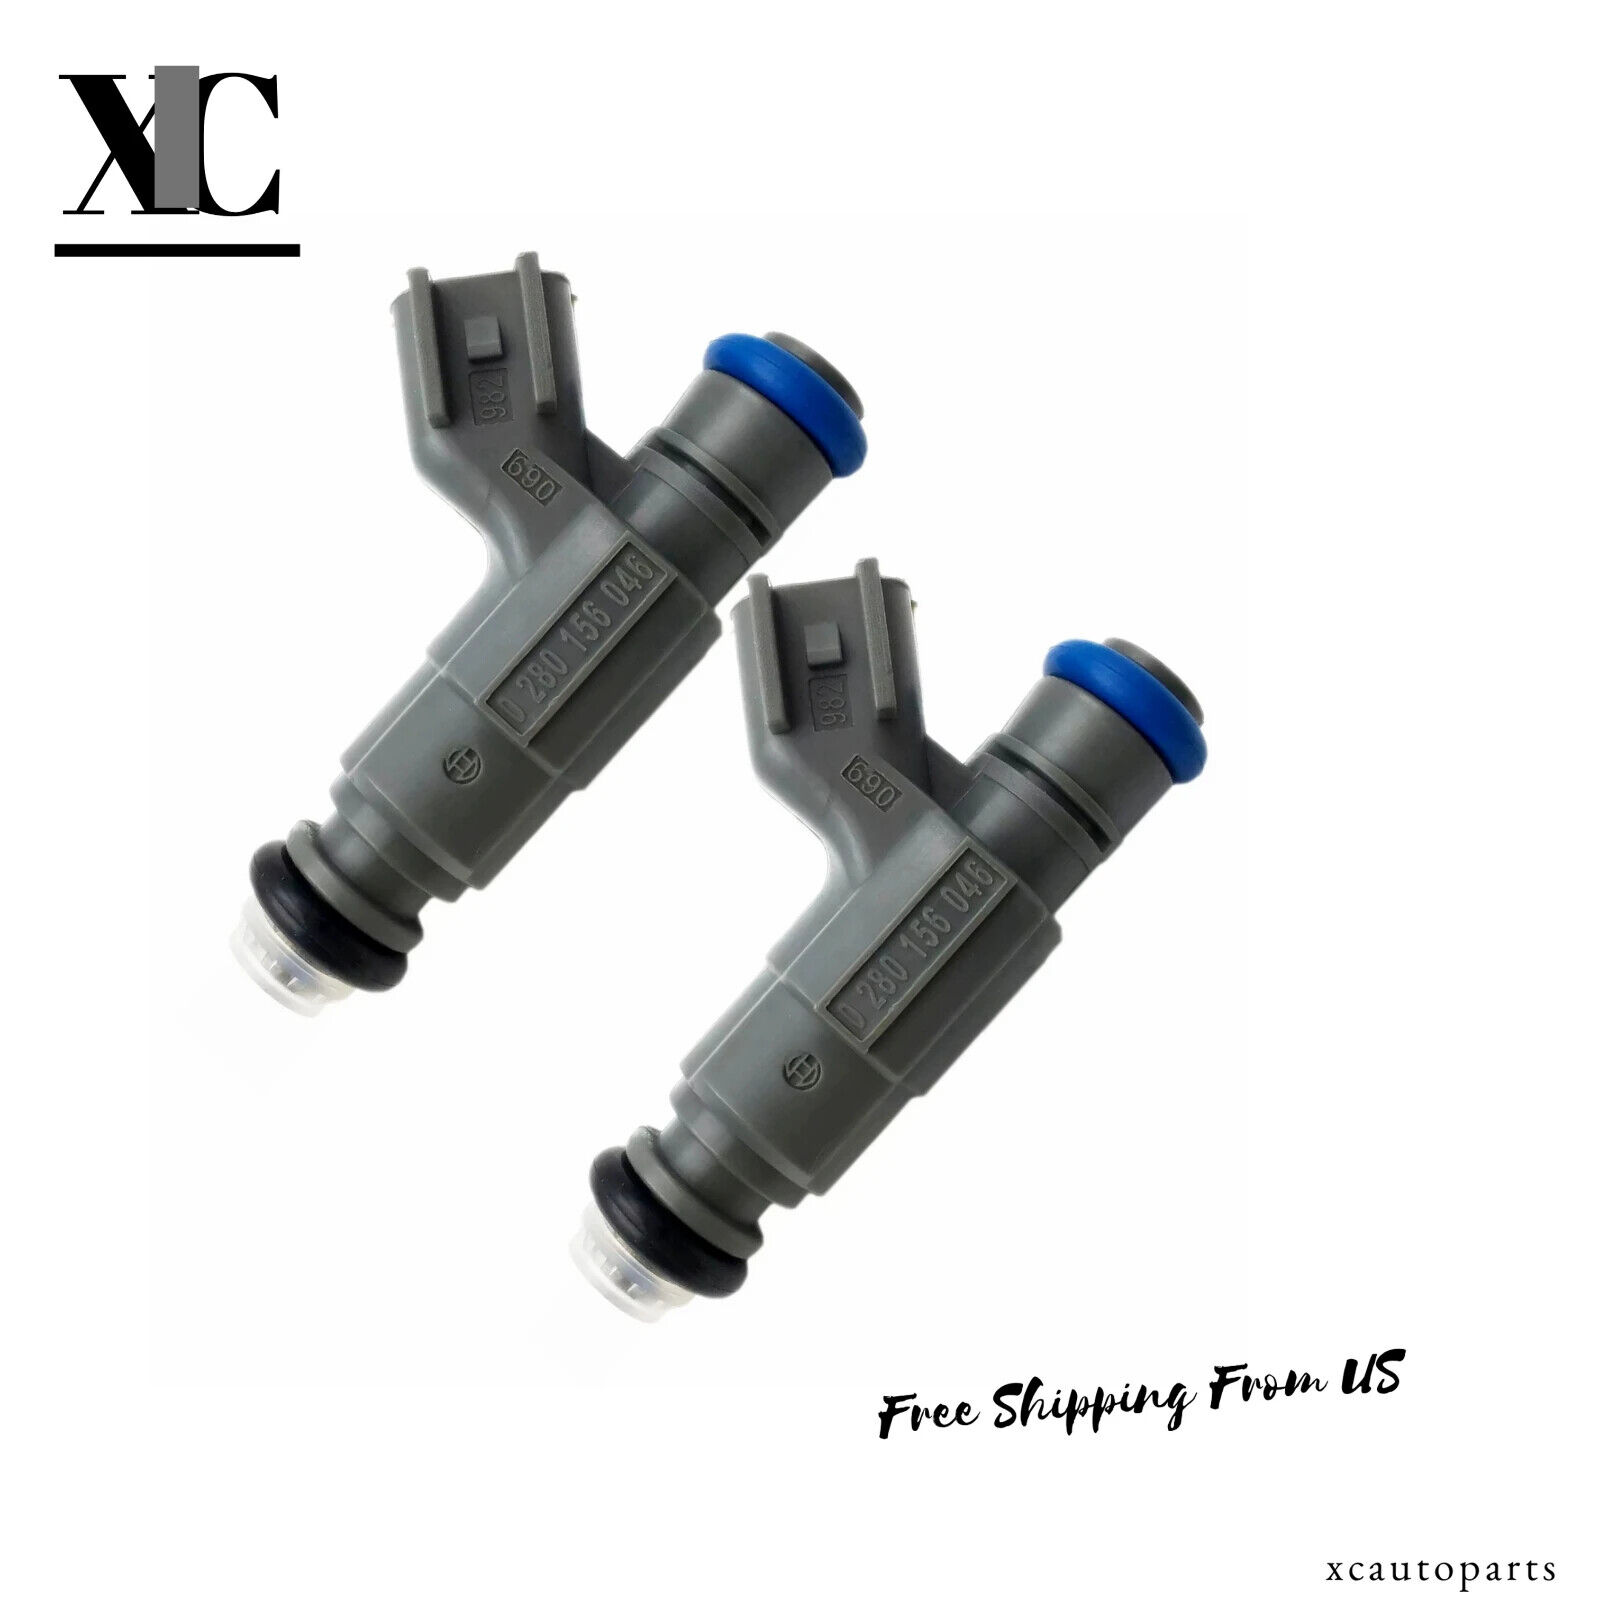 2 X Fuel Injectors For 98-01 Victory V92C Standard Sport Deluxe Cruiser 1253174